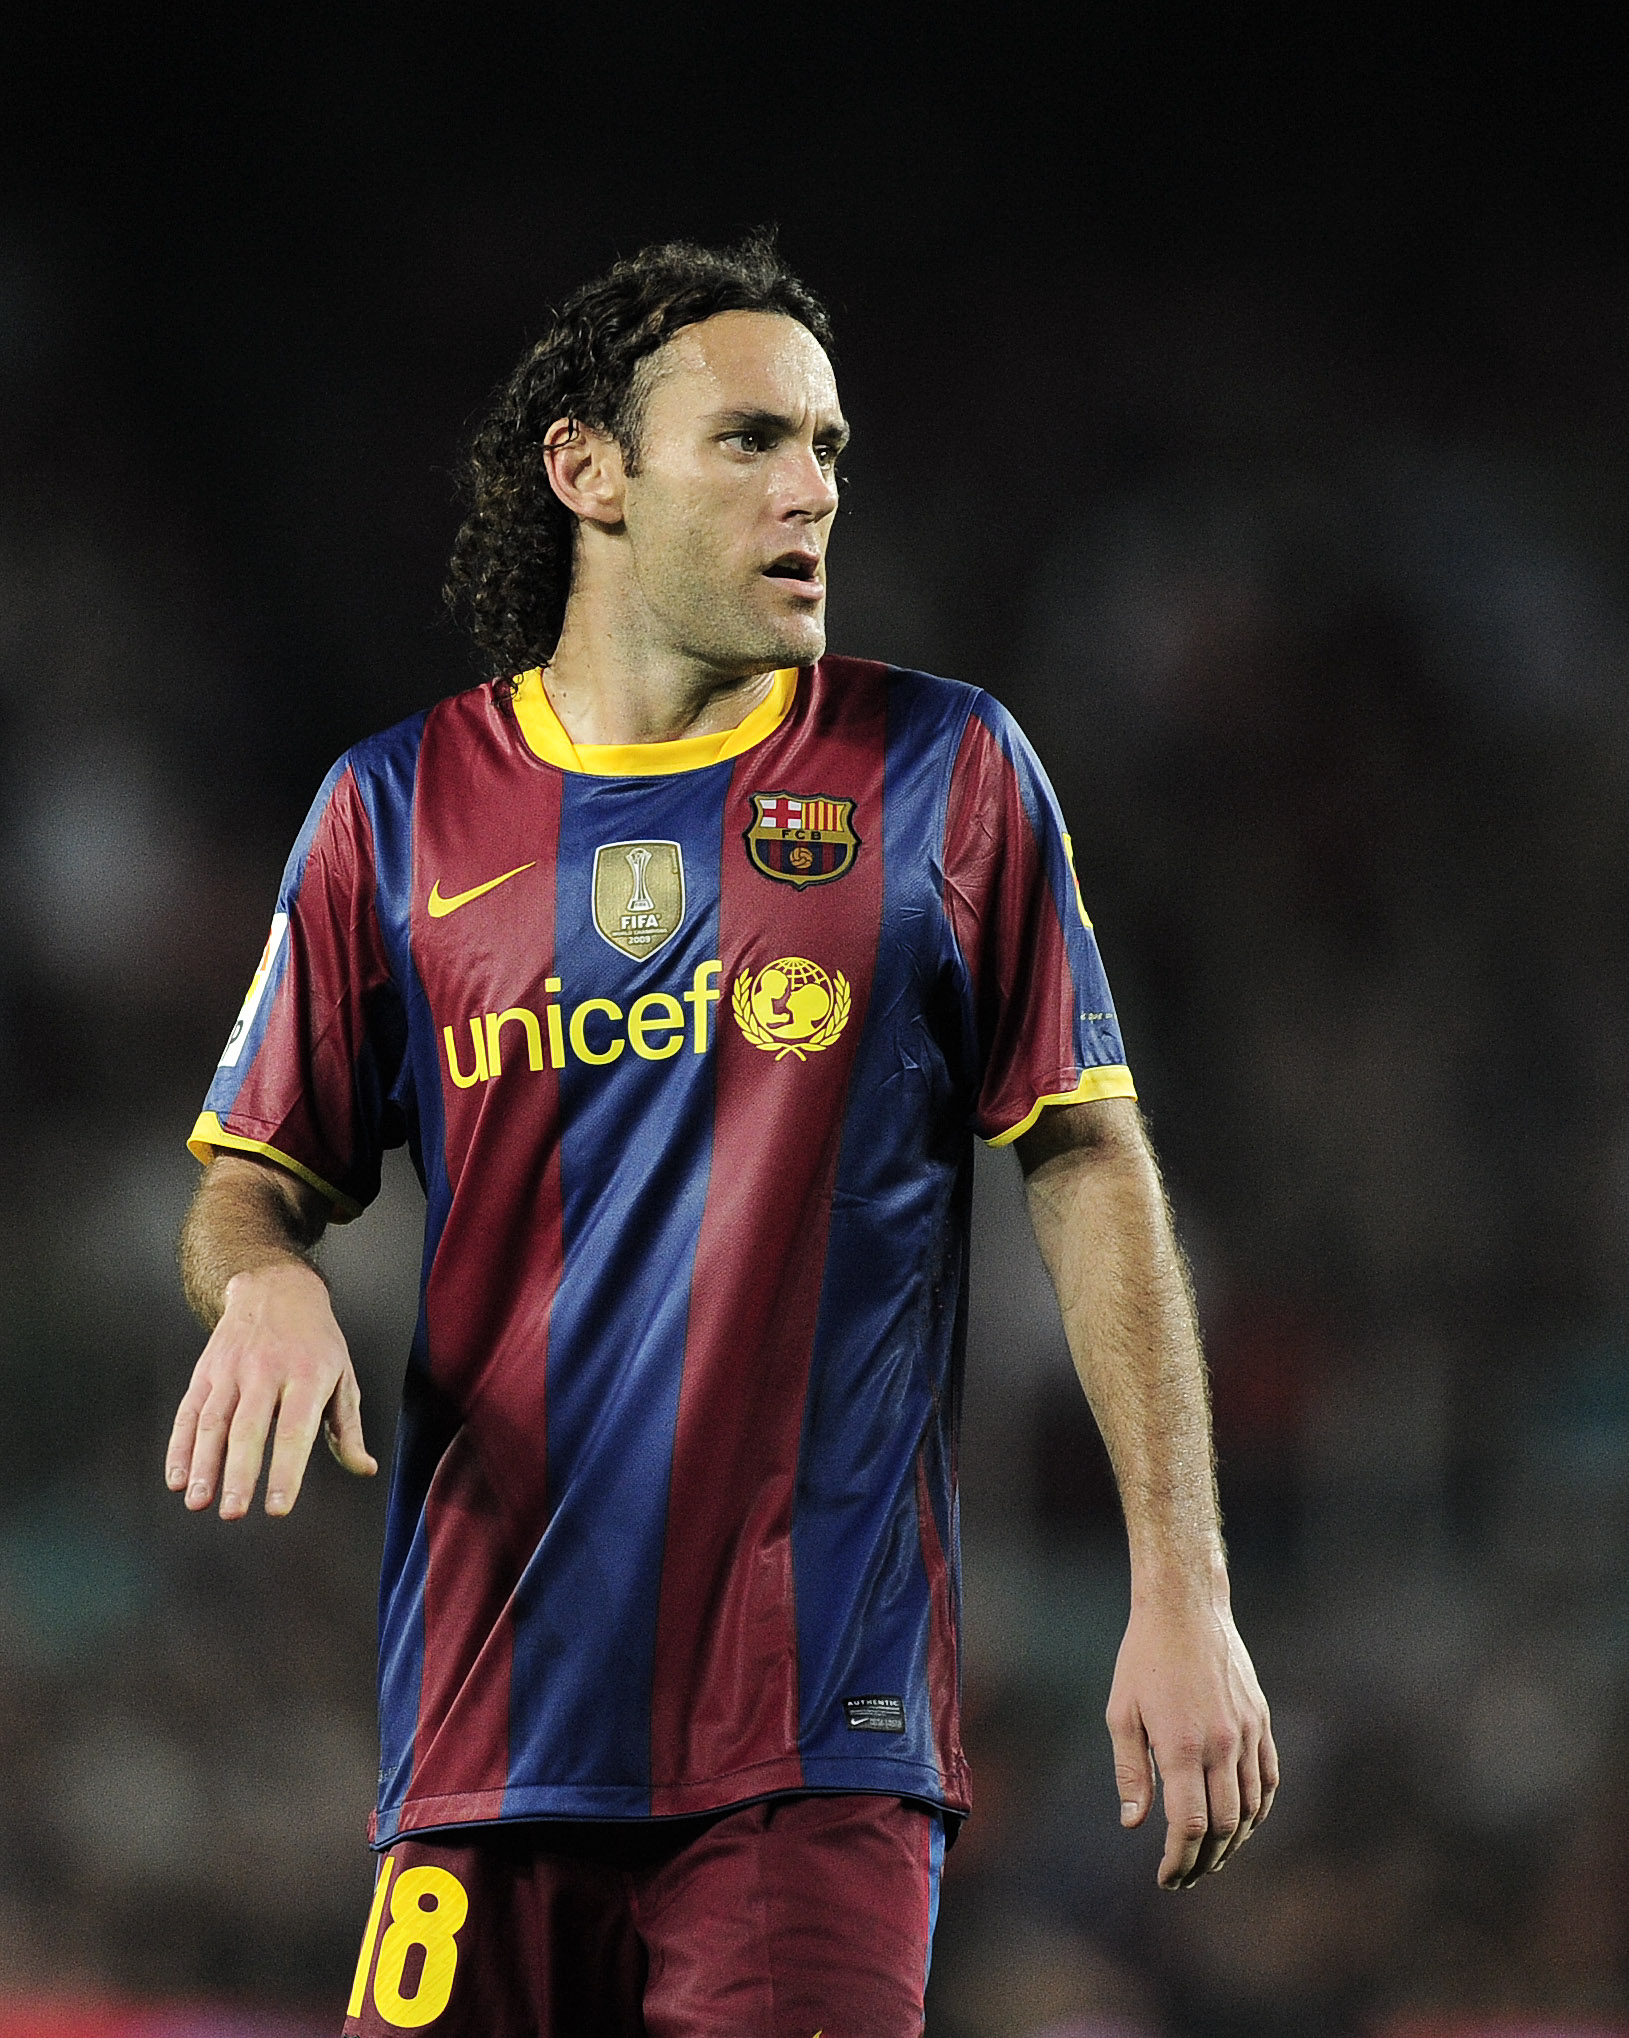 BARCELONA, SPAIN - OCTOBER 03:  Gabriel Milito of Barcelona looks on during the La Liga match between Barcelona and Mallorca at the Camp Nou stadium on October 3, 2010 in Barcelona, Spain. The Match ended in a 1-1 draw. (Photo by David Ramos/Getty Images)